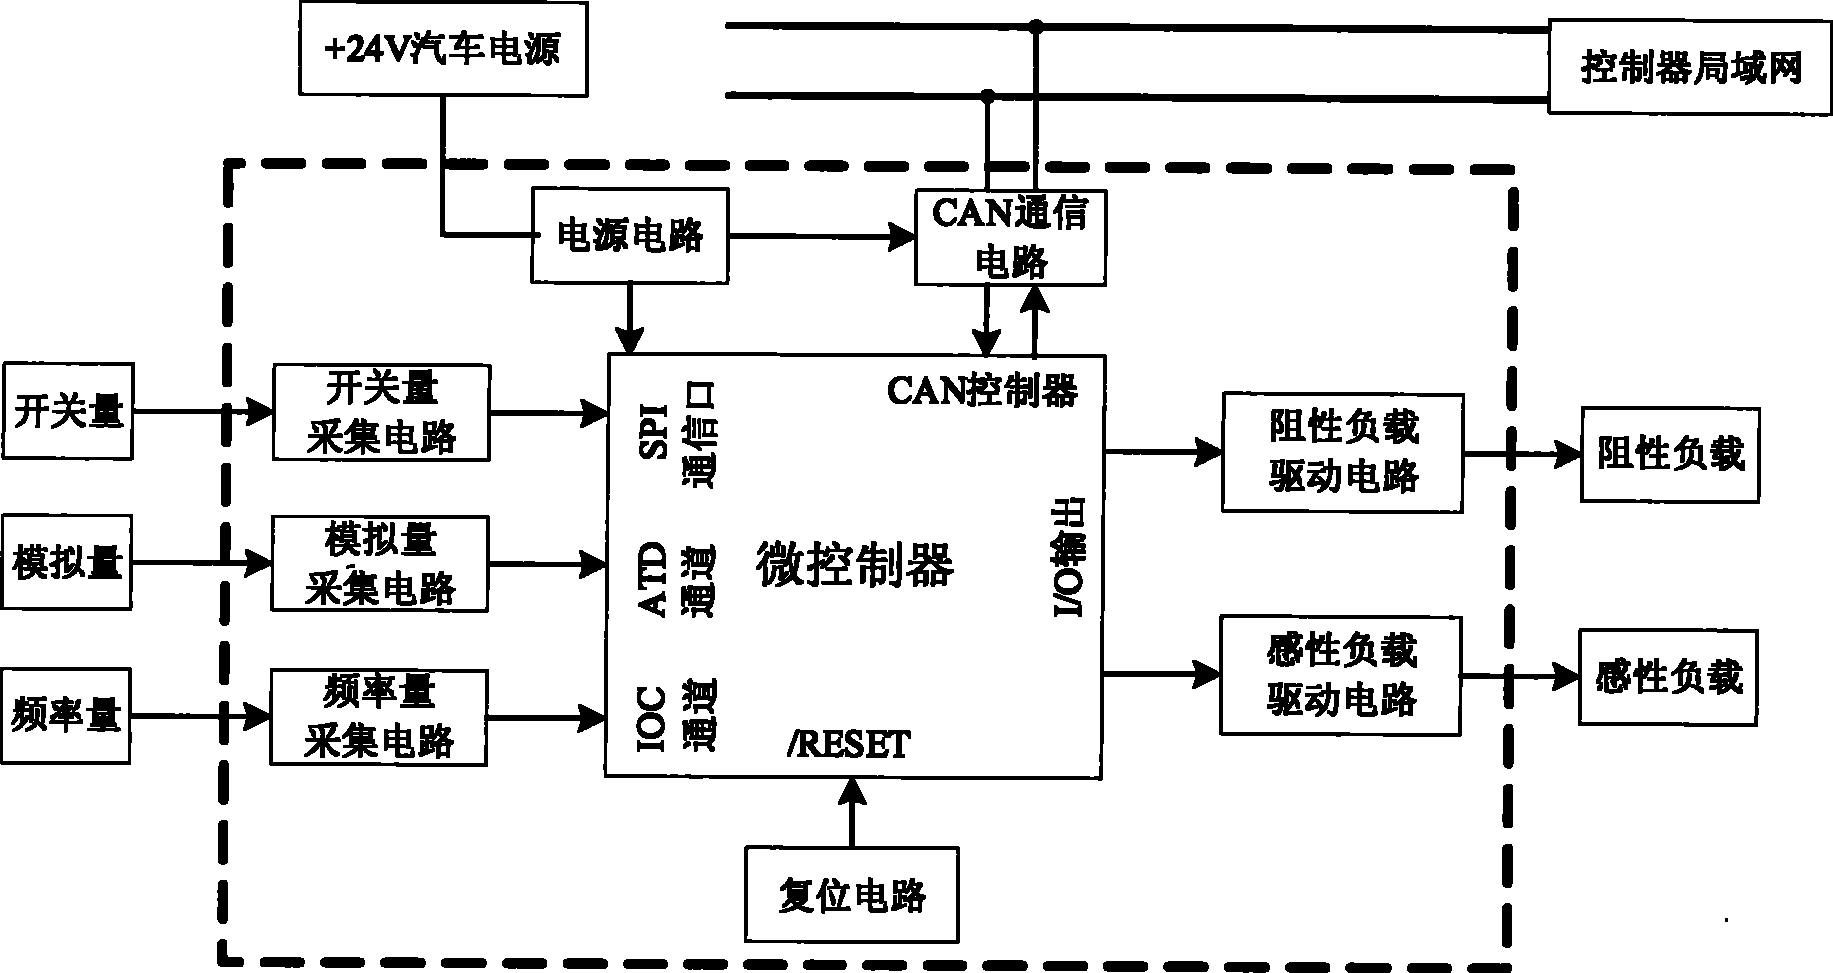 General module for bus vehicle mounted network and information integration control system